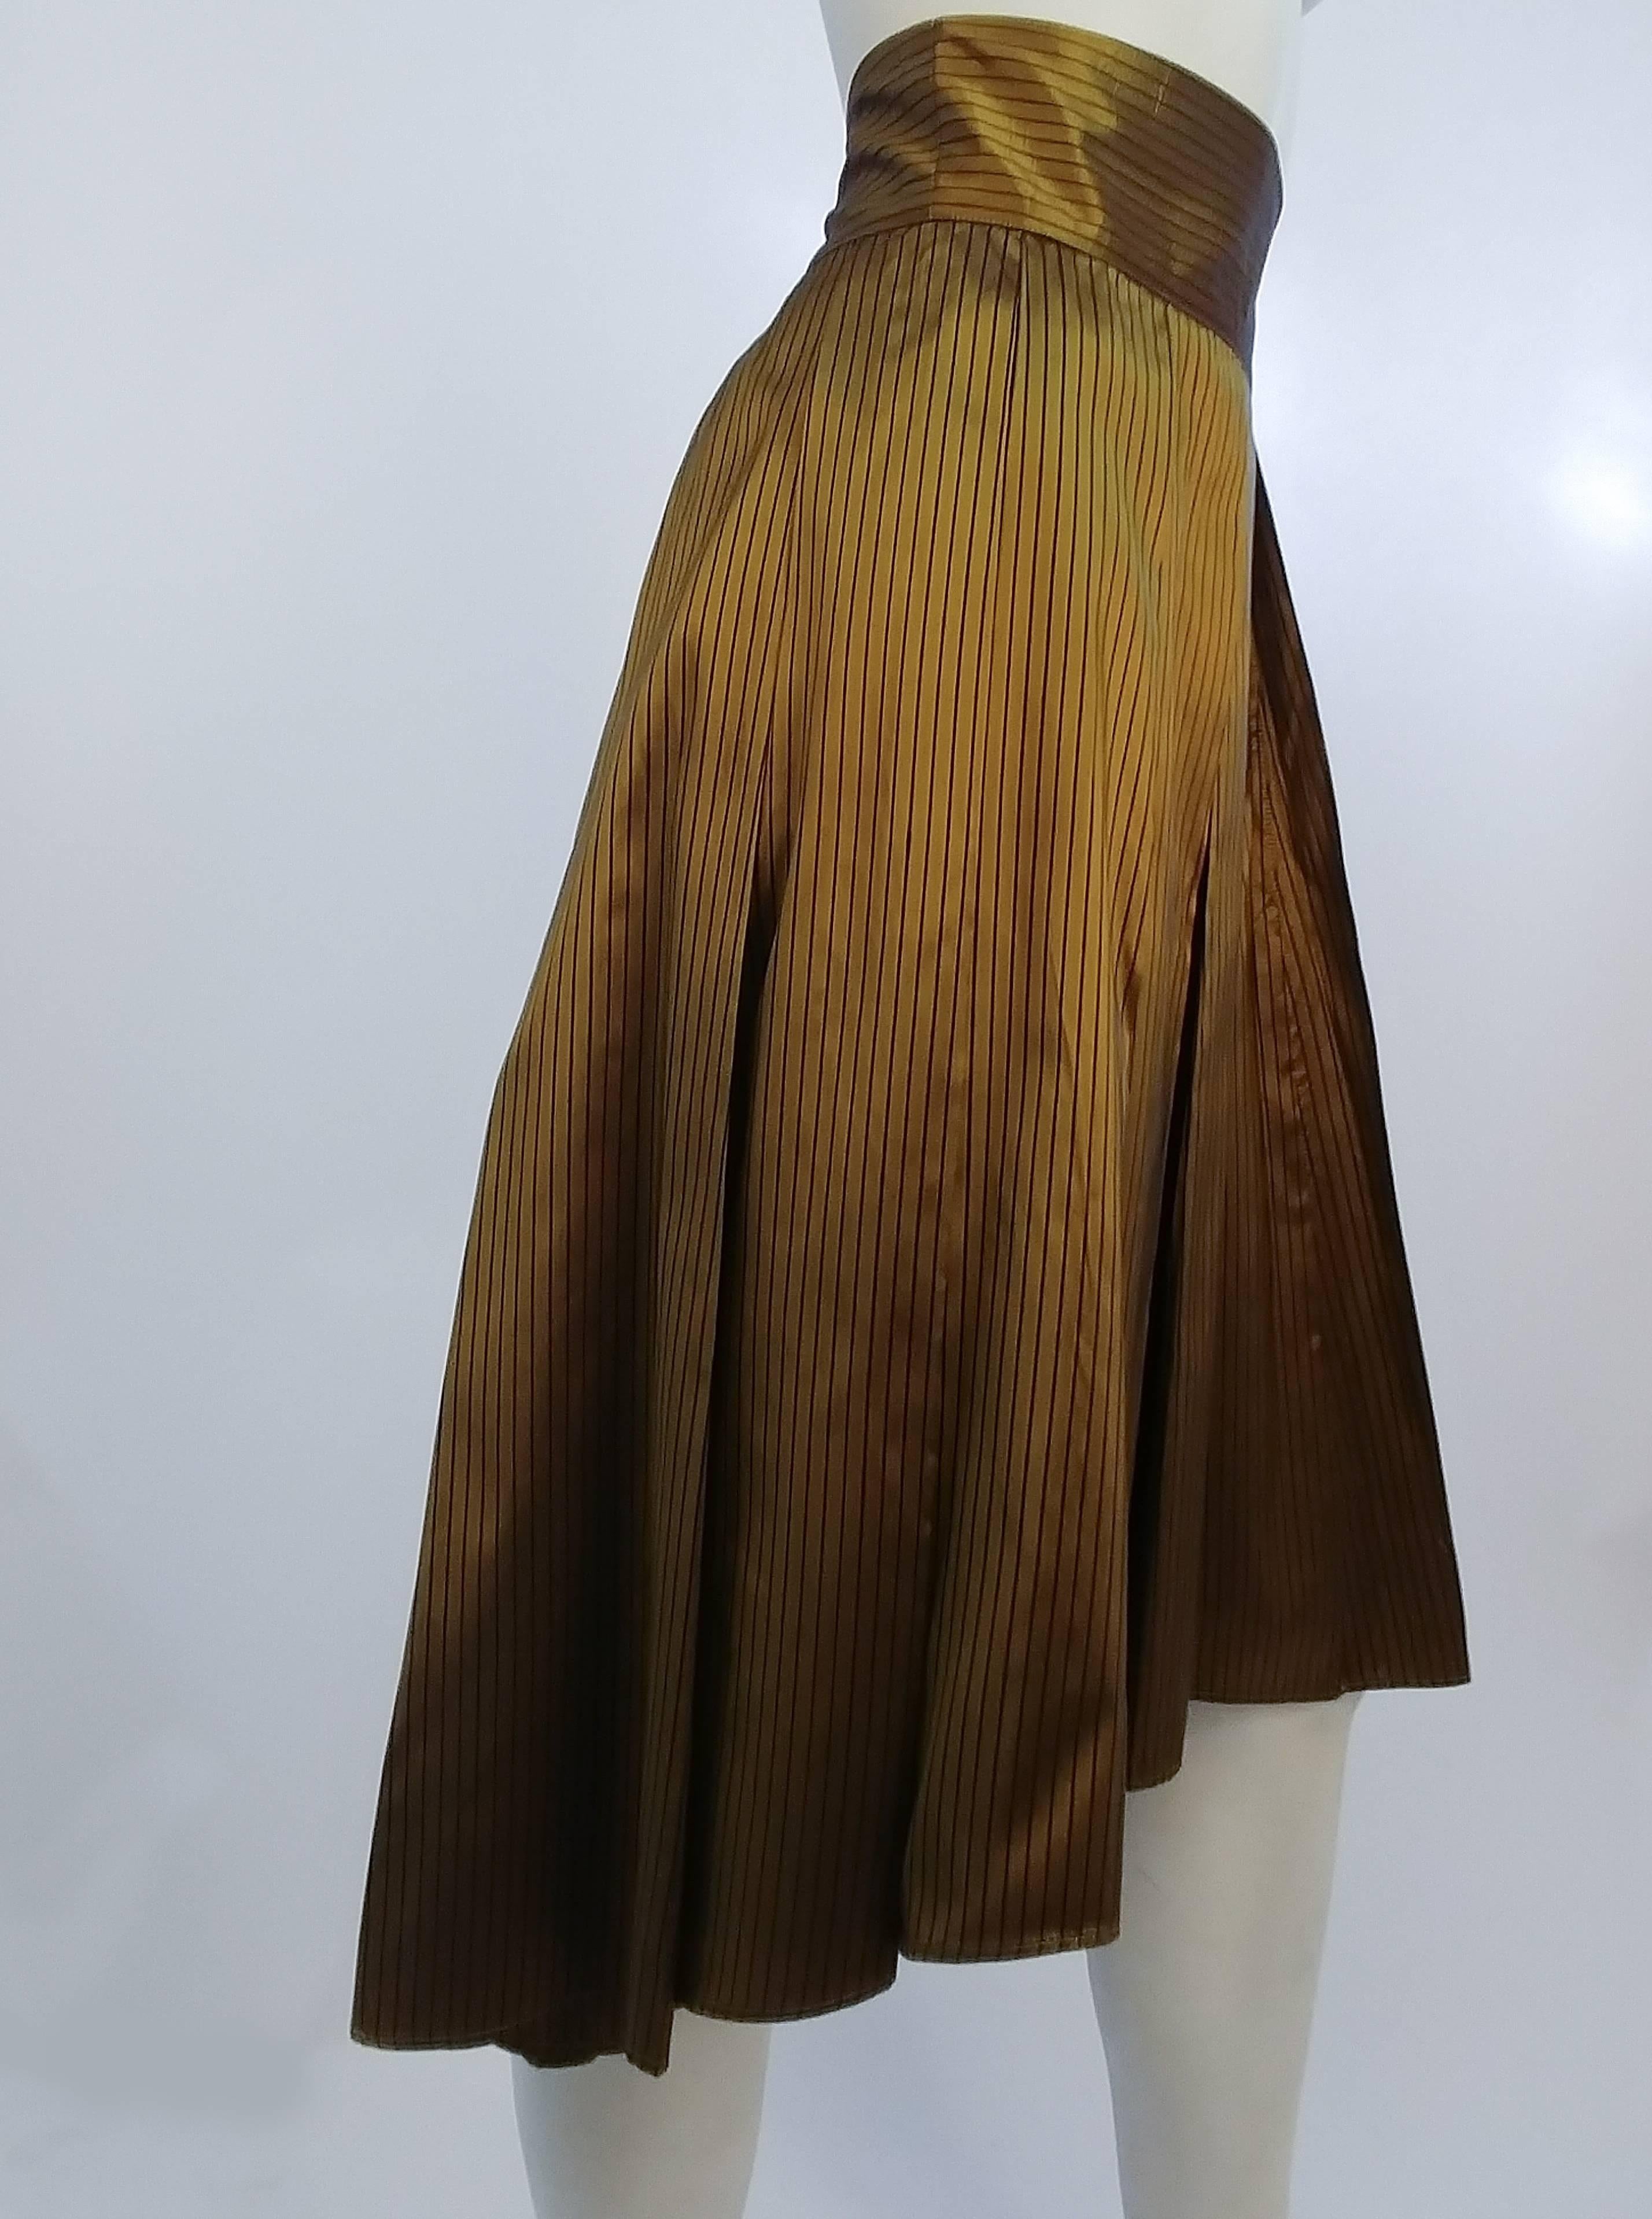 1990s Romeo Giglo Olive Striped High Low Skirt. Thick waistband buttons at back with three covered buttons. 